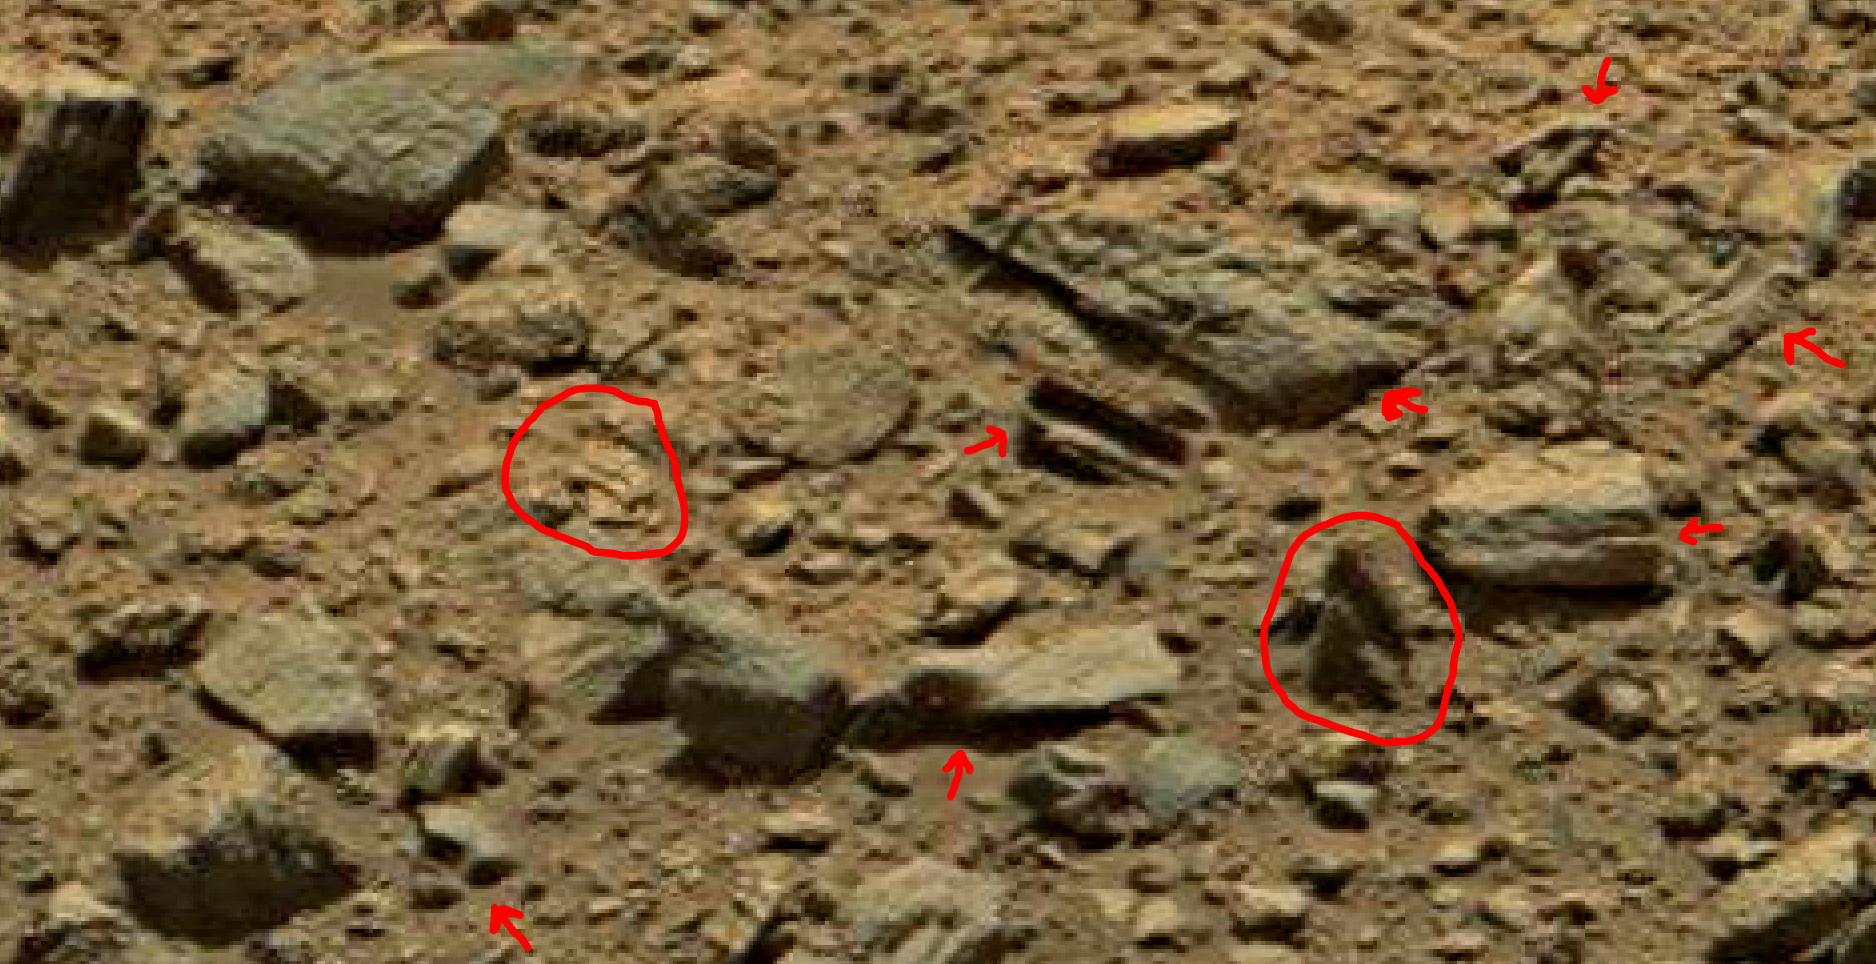 mars sol 1378 anomaly-artifacts 3a was life on mars